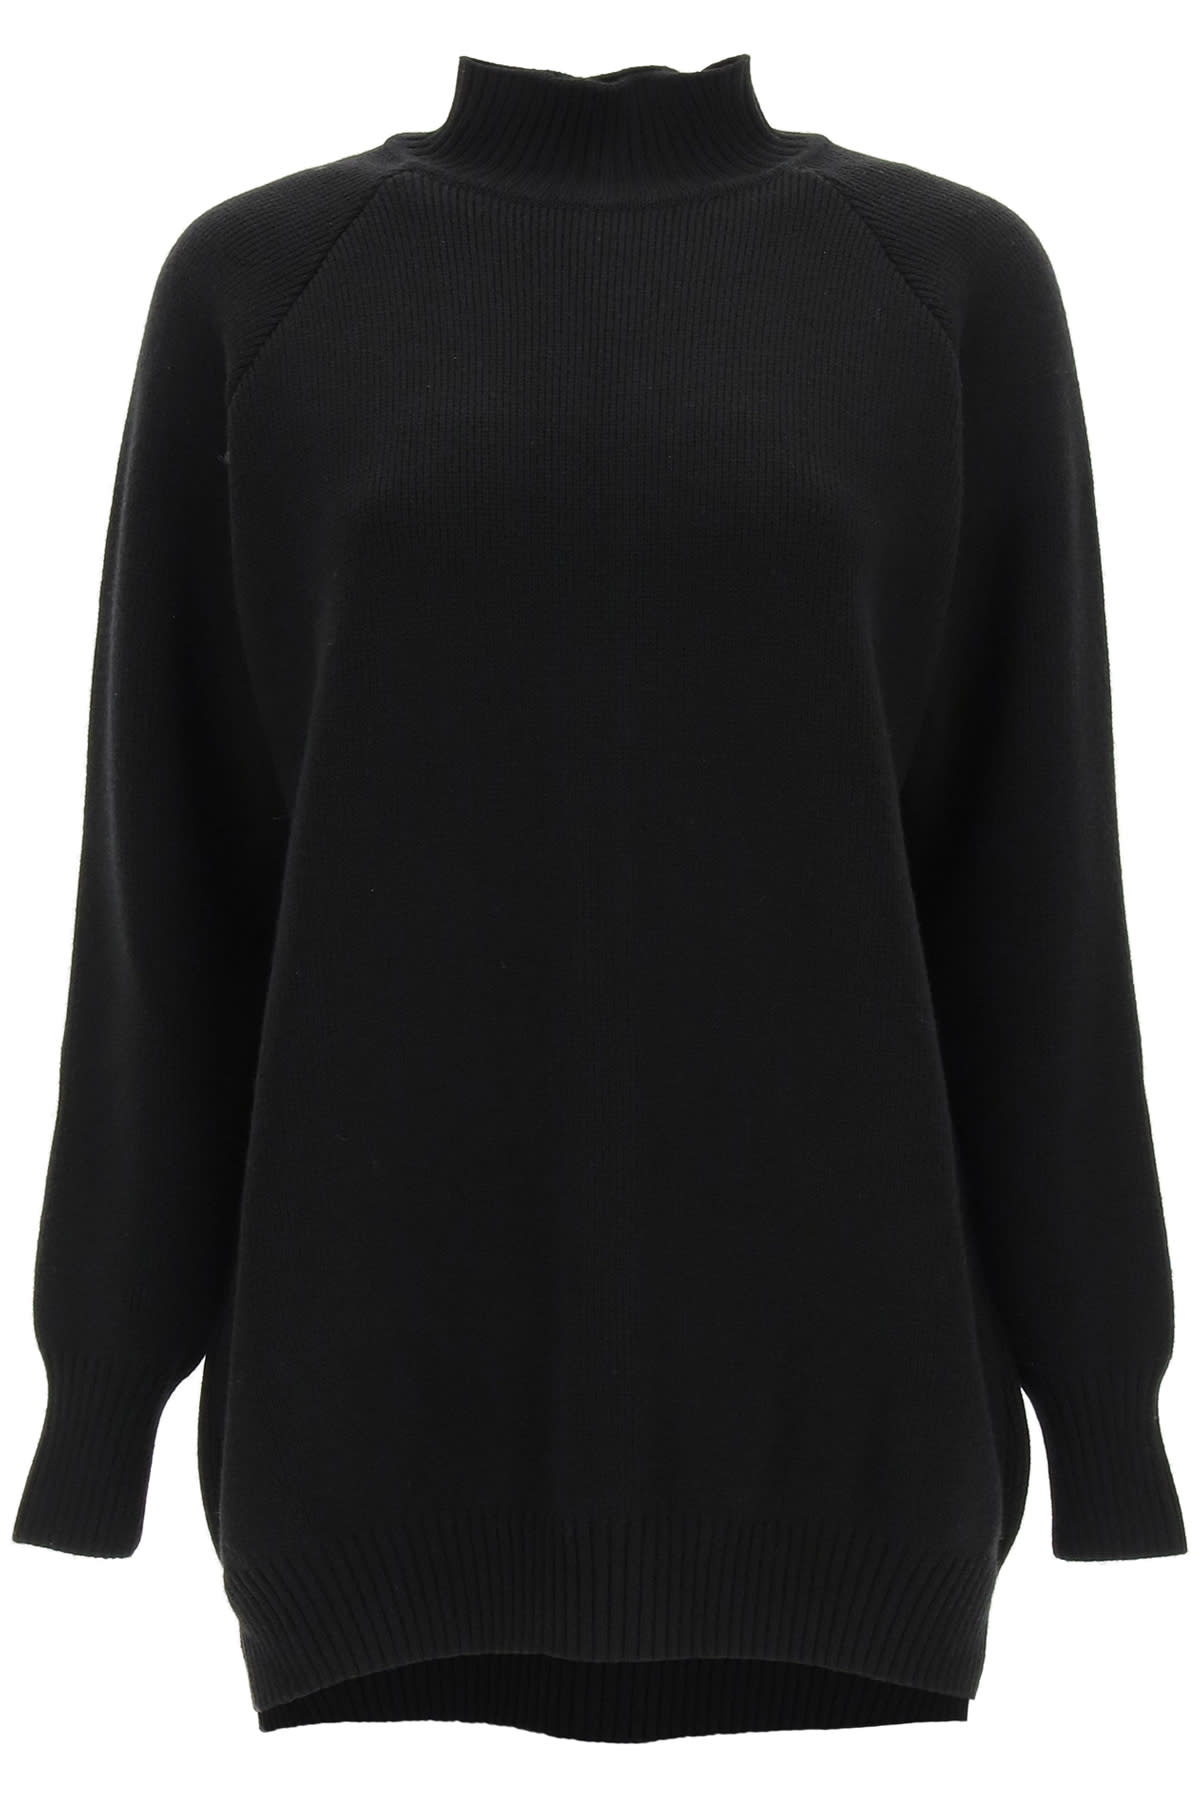 Simone Rocha Turtleneck Sweater With Back Buttons